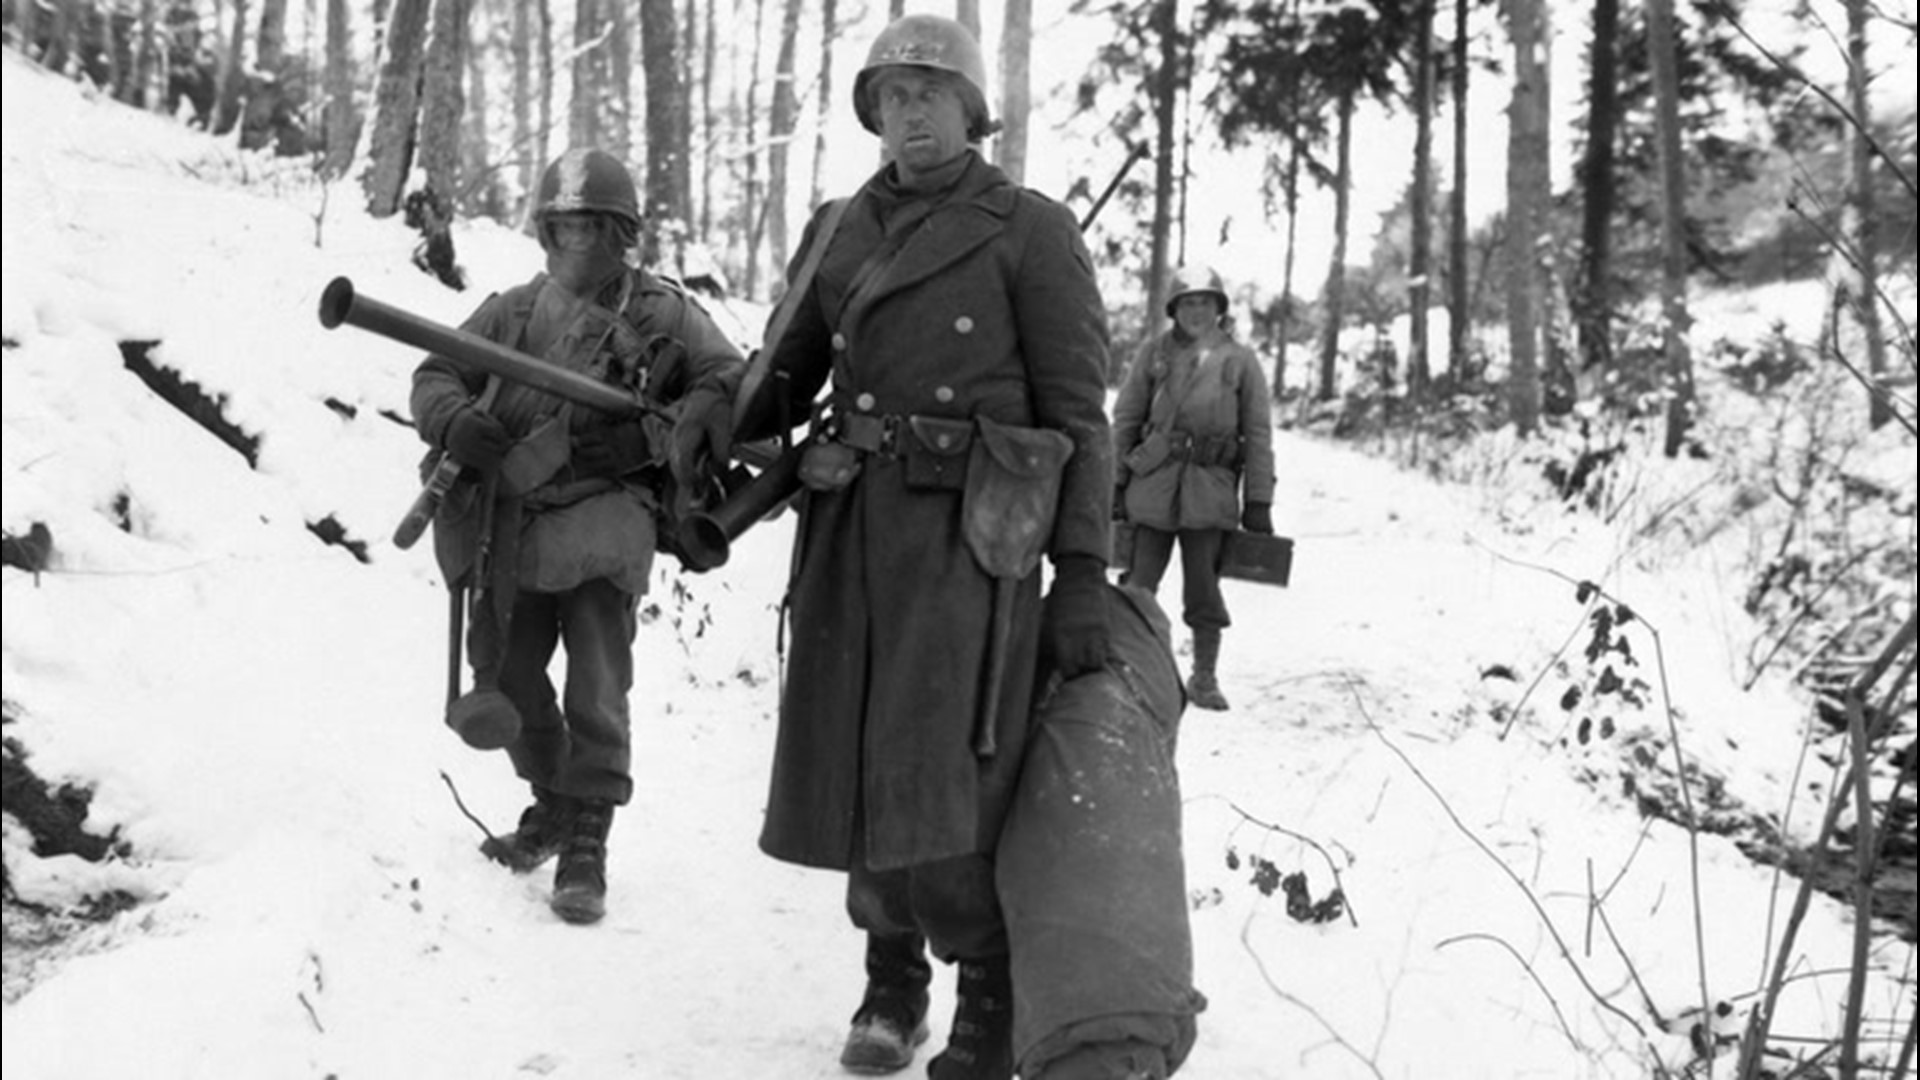 Seventy-five years ago, WWII troops had difficulty fighting in the Battle of the Bulge because of the harsh winter they had to deal with.